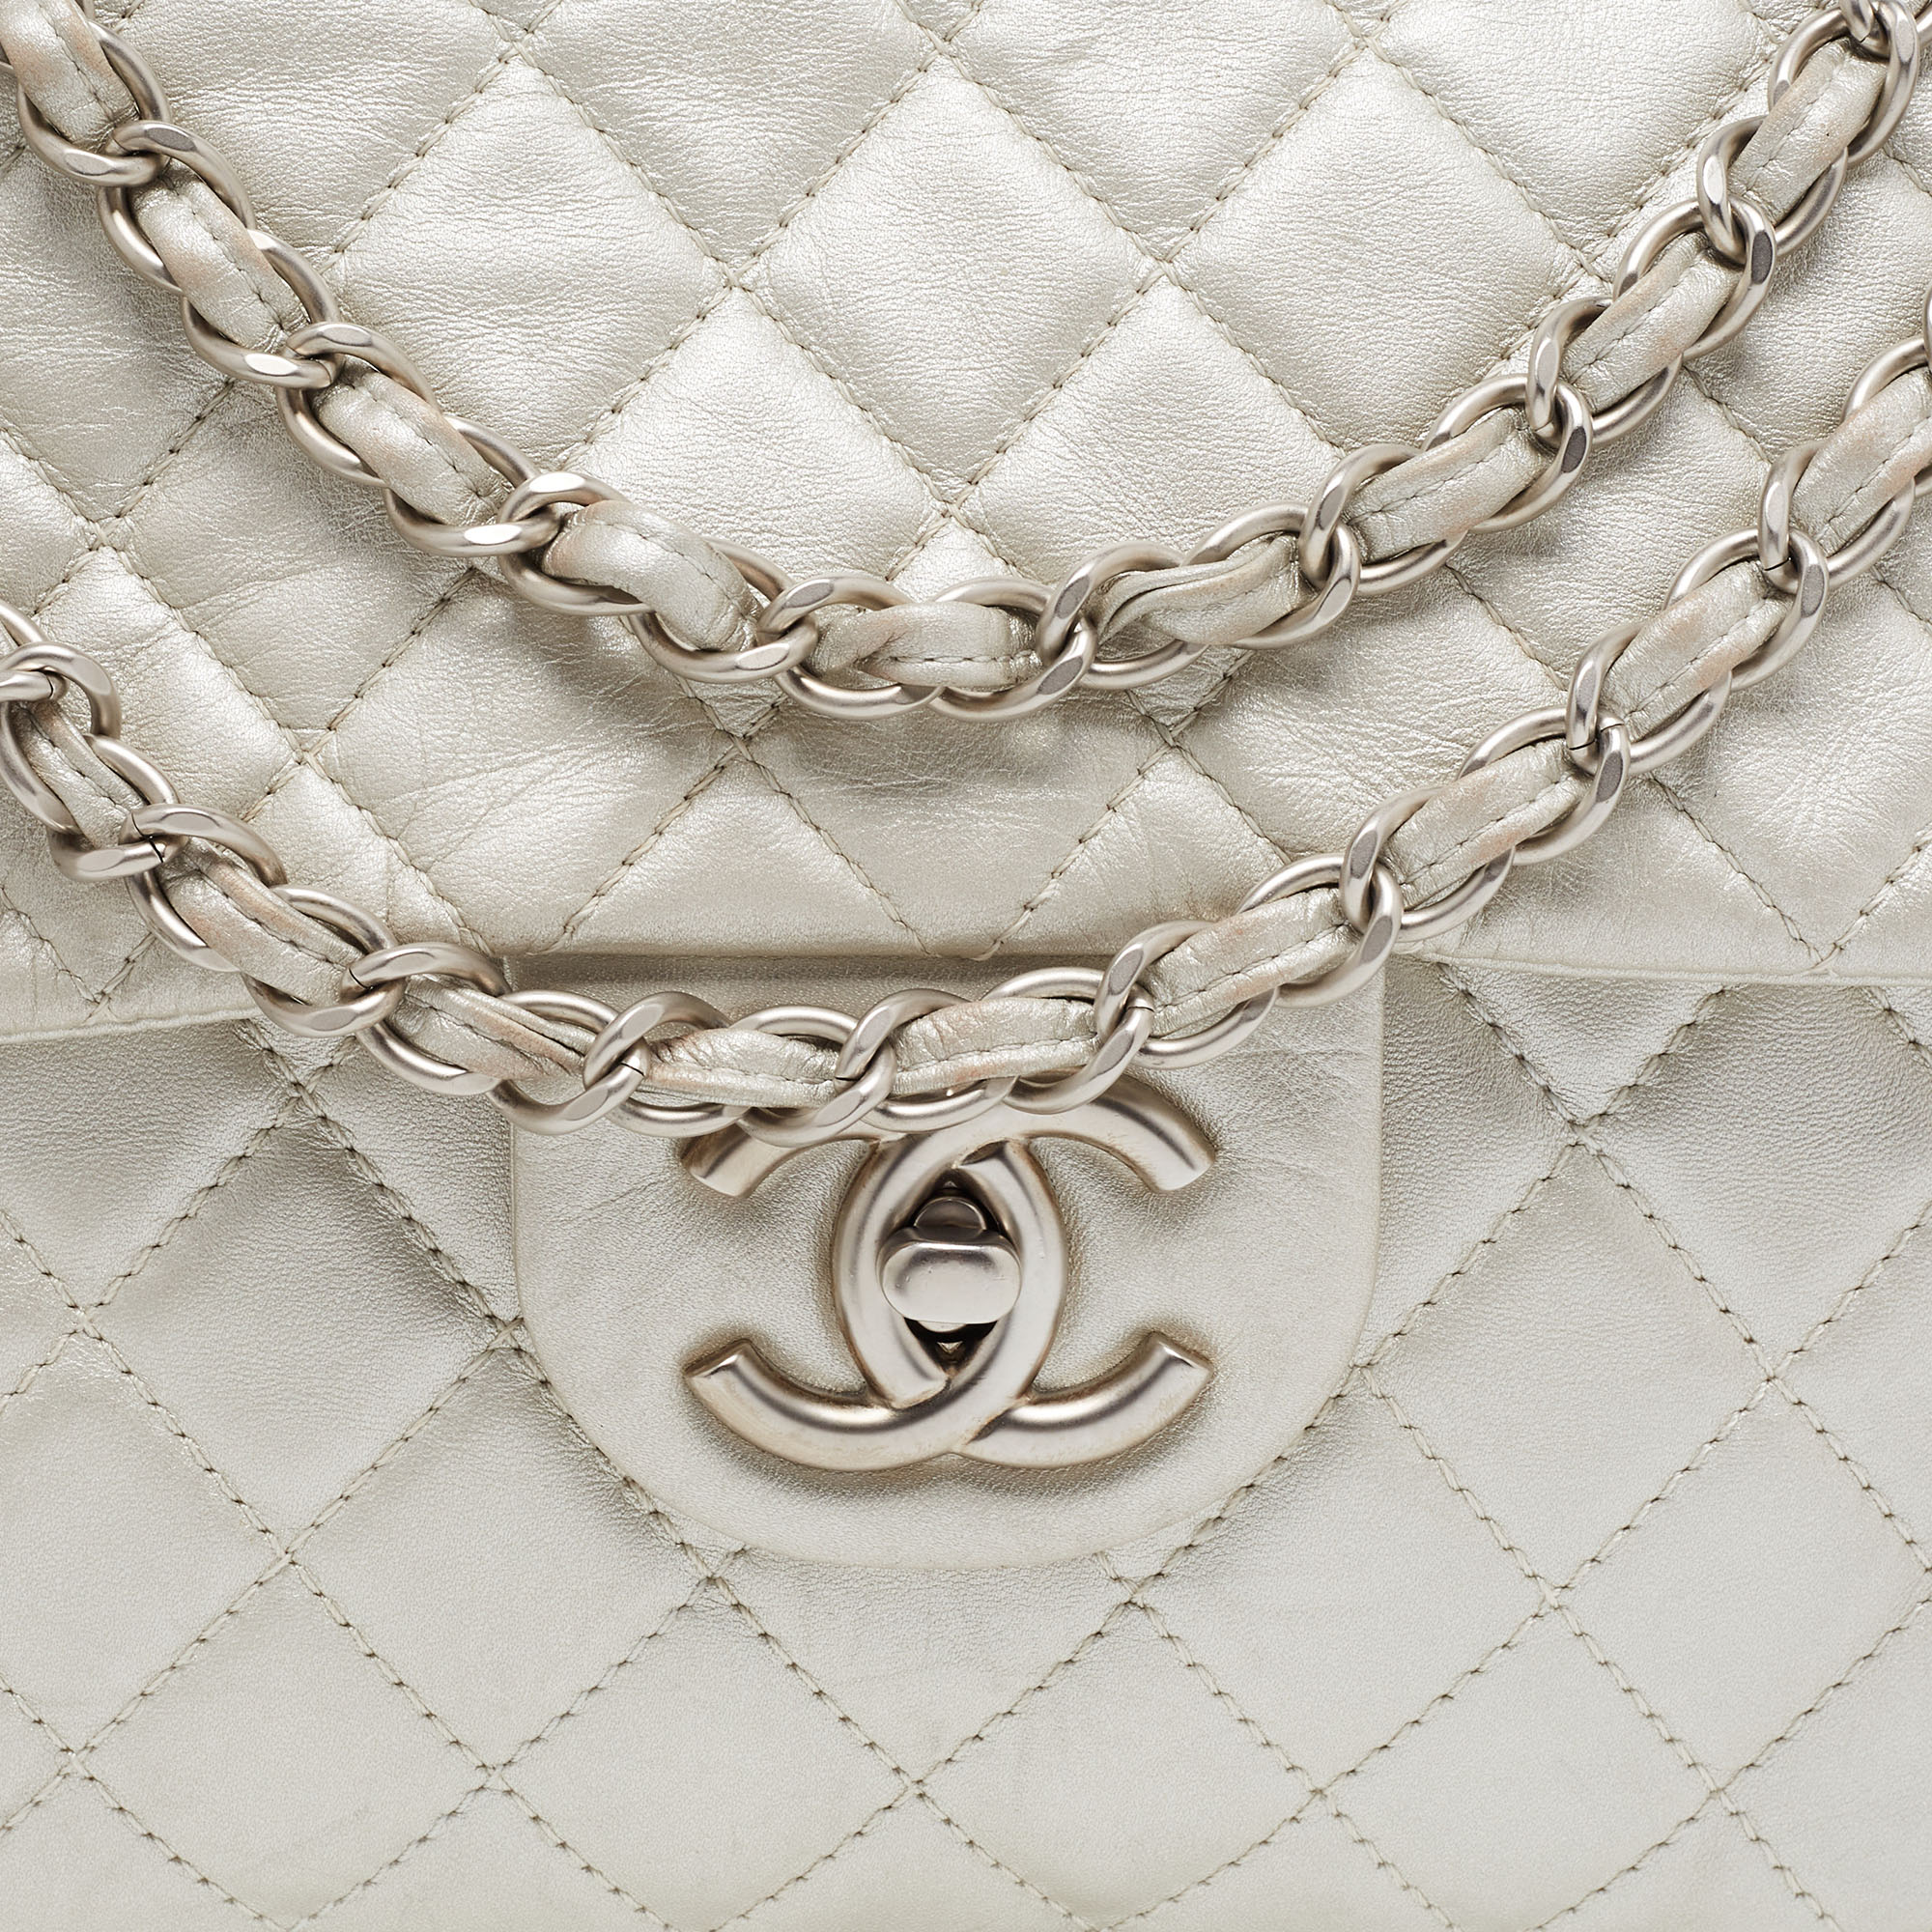 Chanel Metallic Grey Quilted Leather Maxi Classic Single Flap Bag